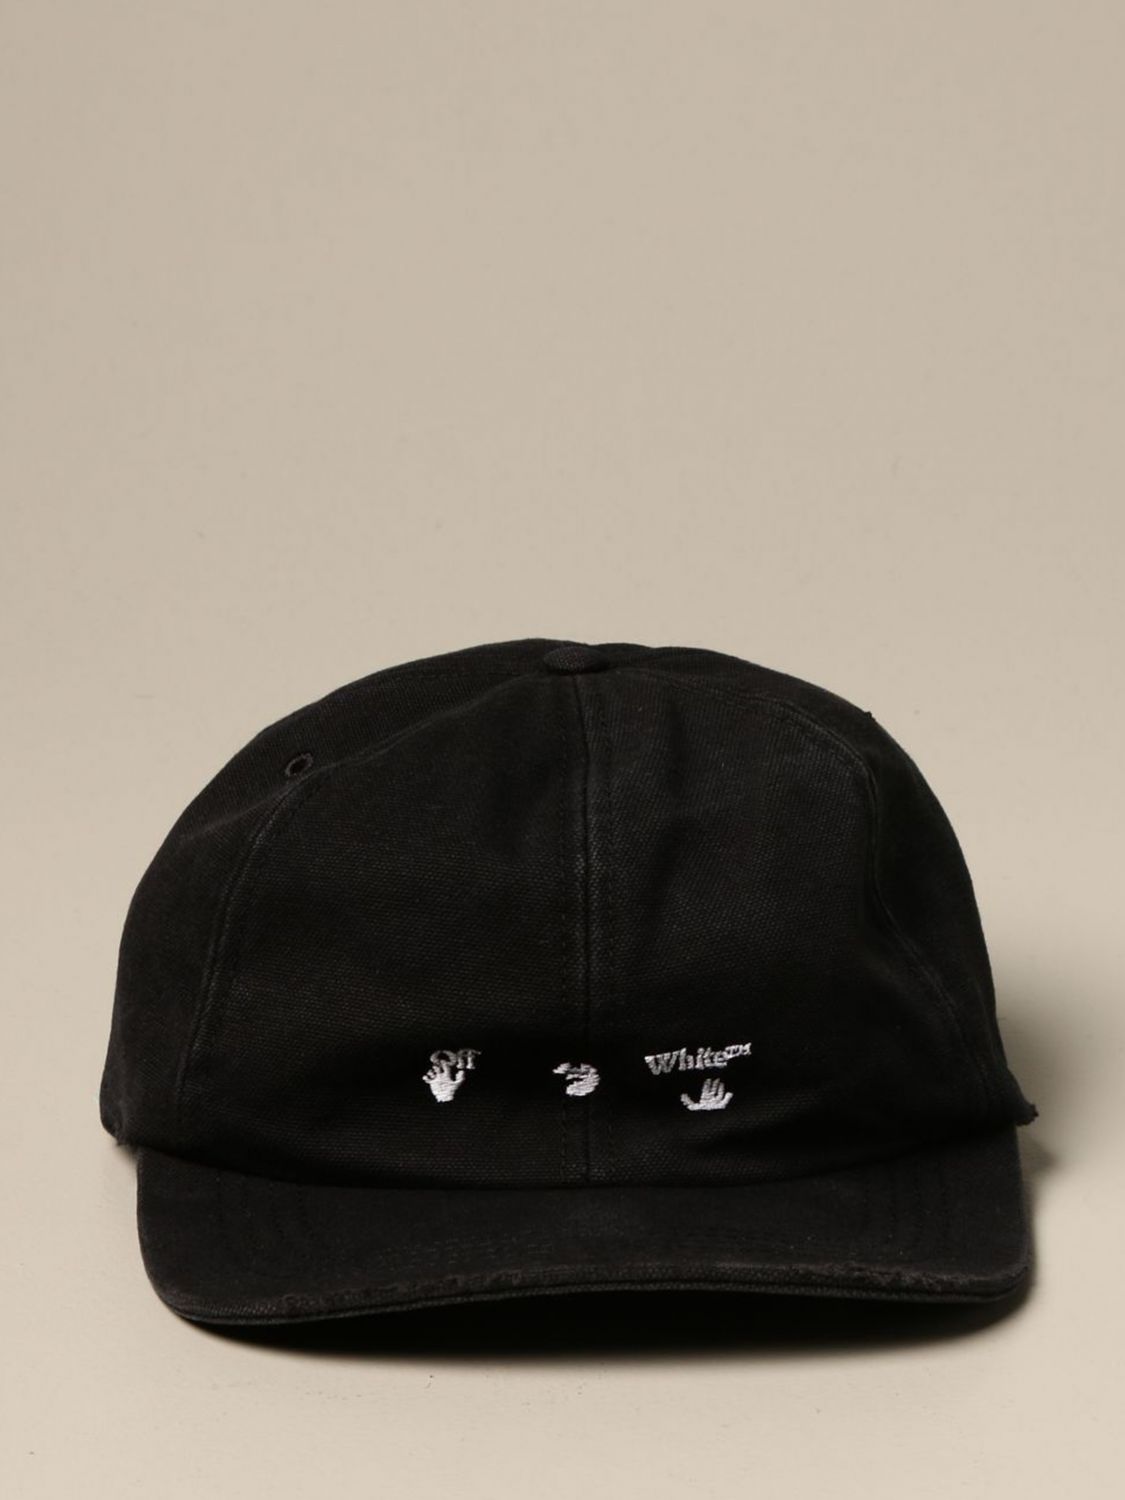 OFF-WHITE: Off White cotton hat with logo - Black | Off-White hat